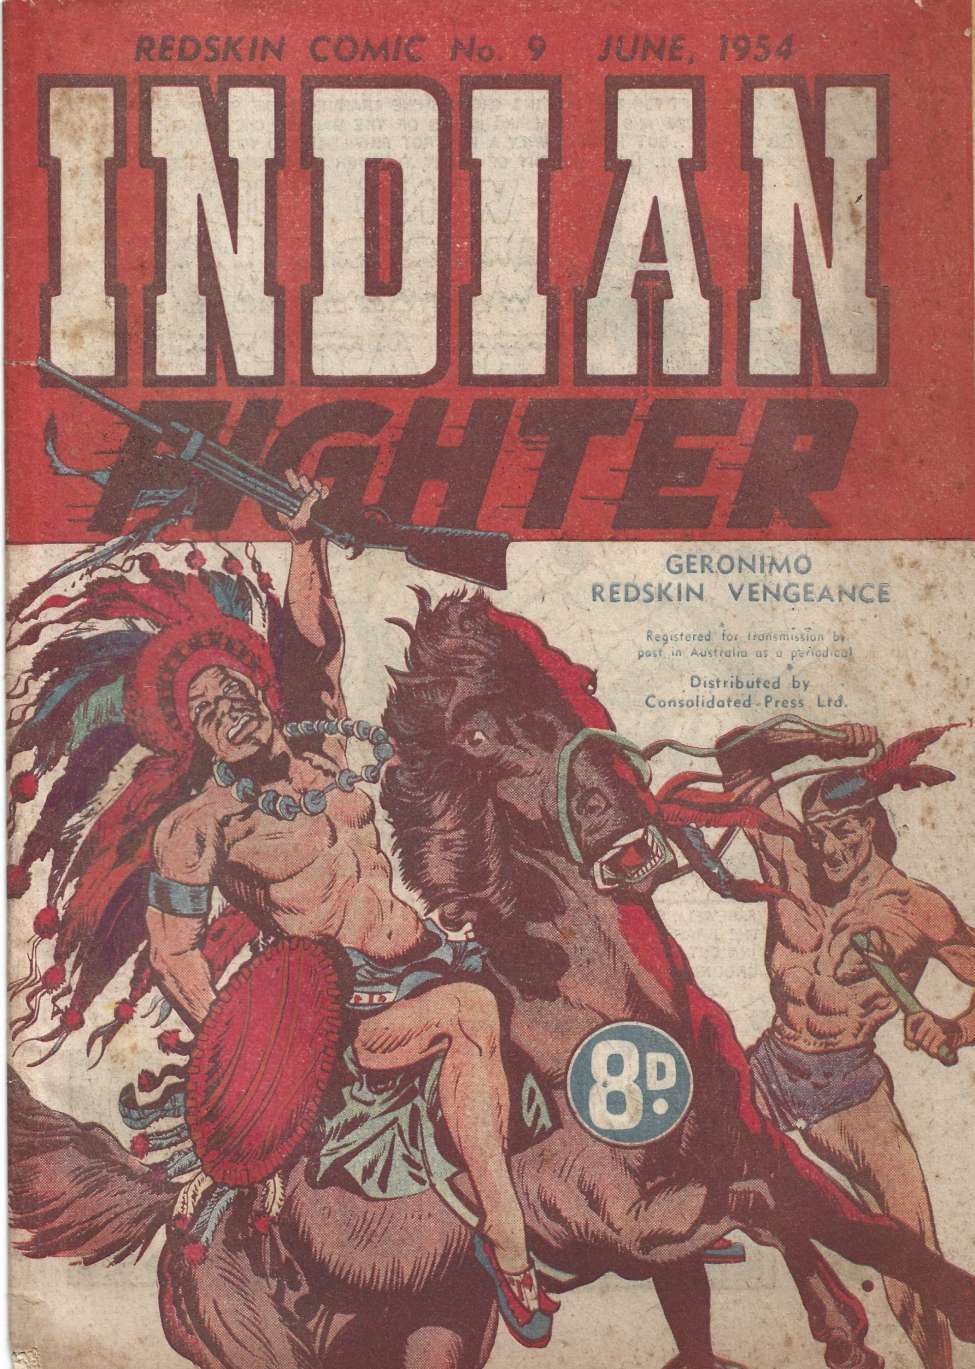 Book Cover For Redskin Comic 9 - Indian Fighter